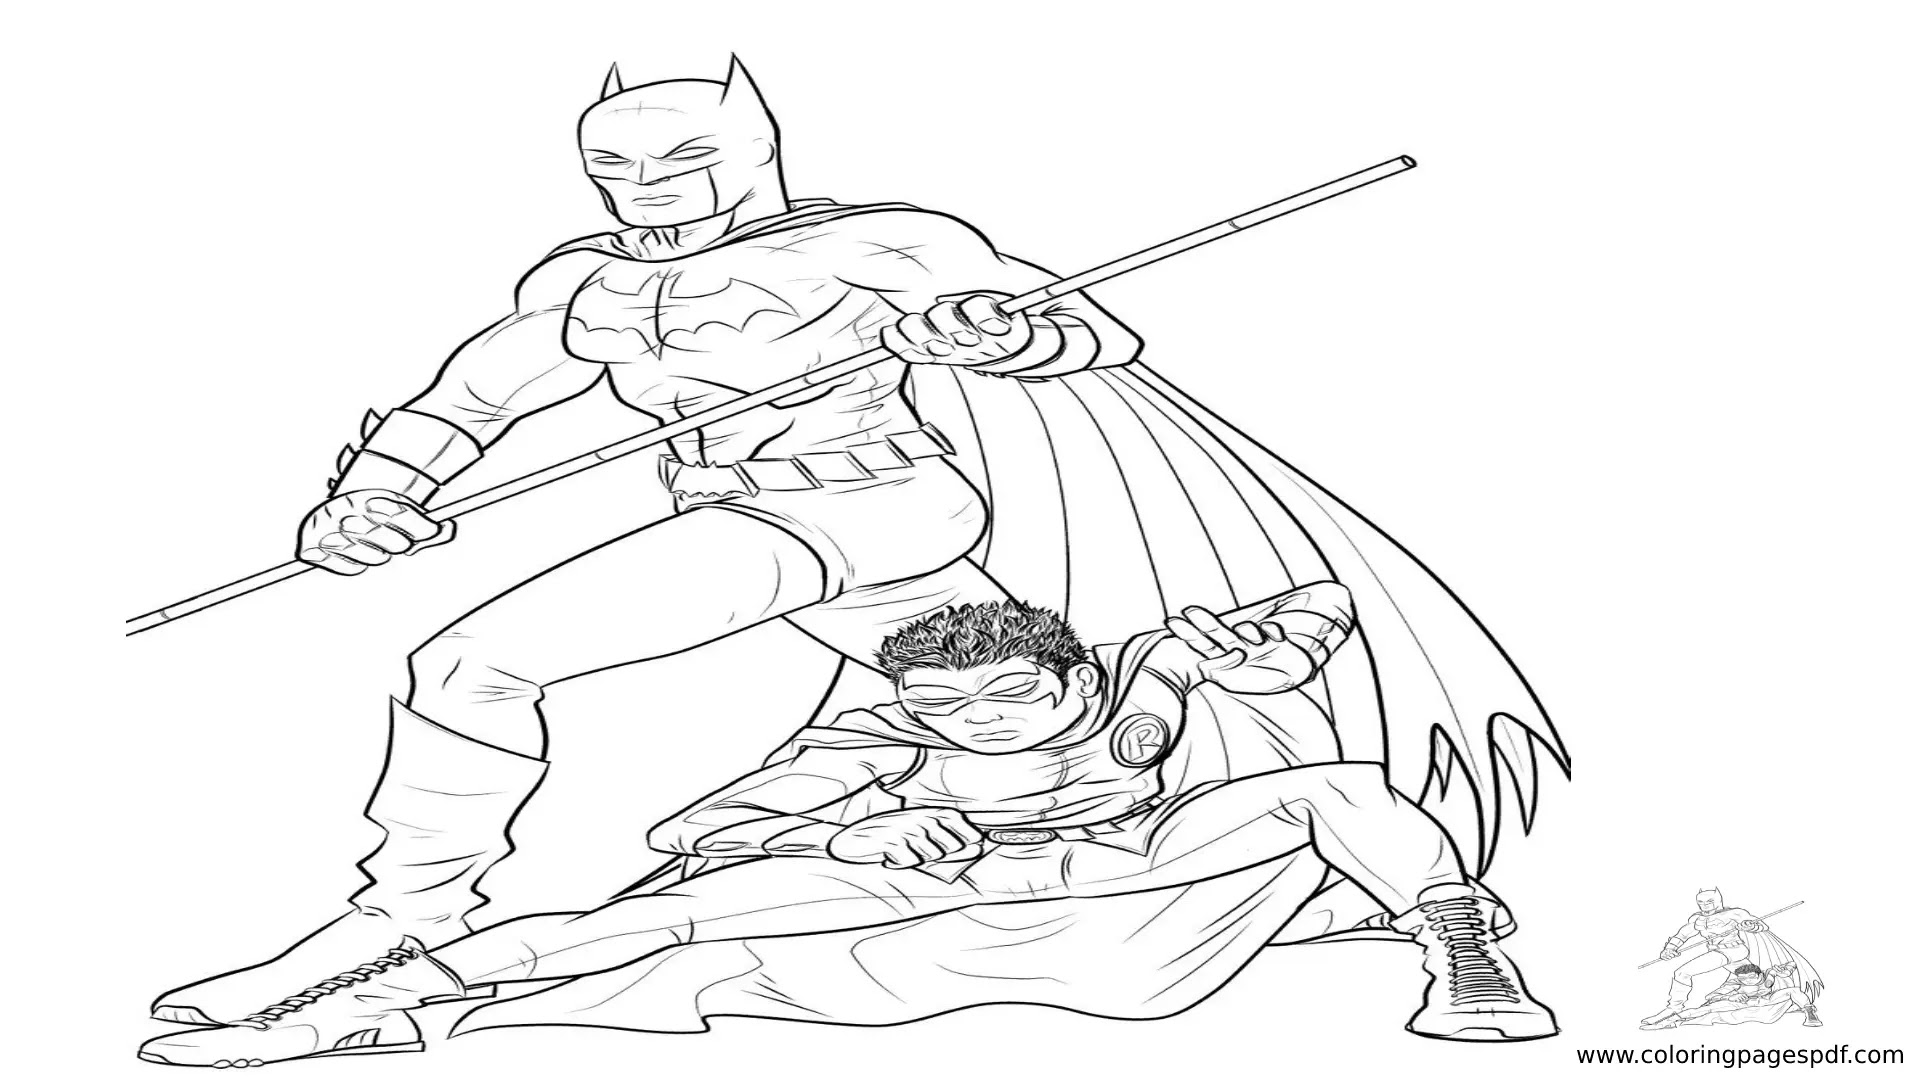 Coloring Pages Of Batman And Robin Fighting